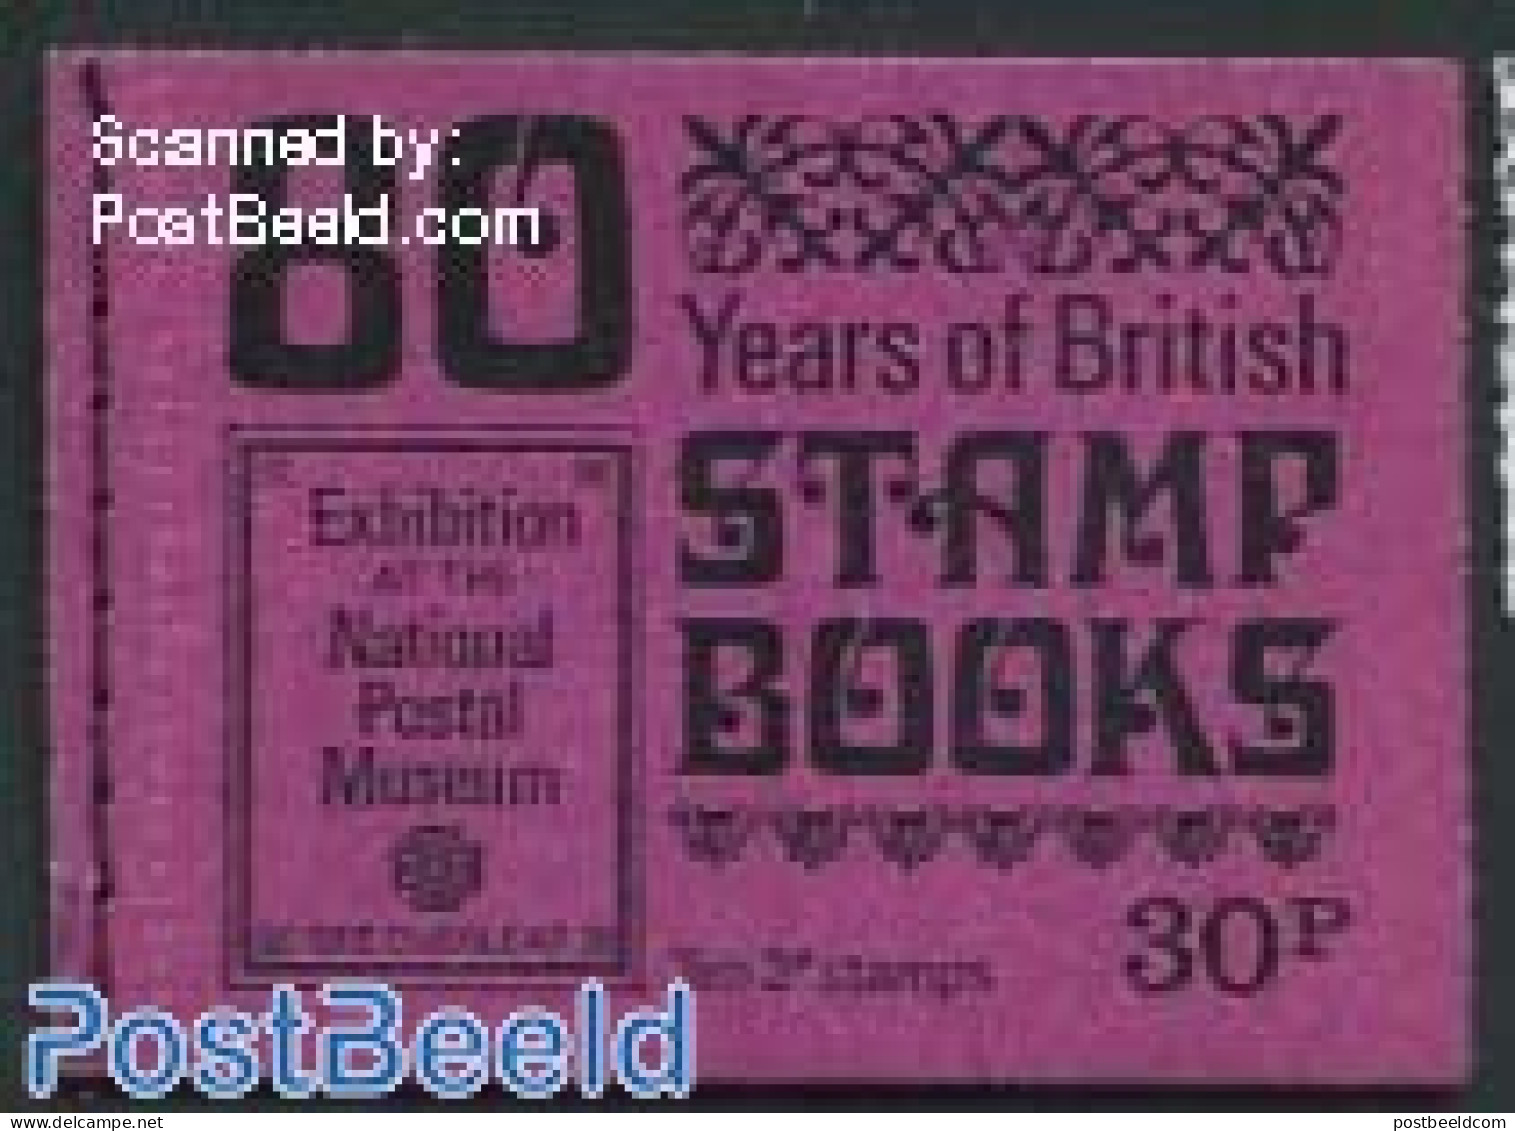 Great Britain 1971 Definitives Booklet, 80 Years Of British Stamp Books, Mint NH, Stamp Booklets - Unused Stamps